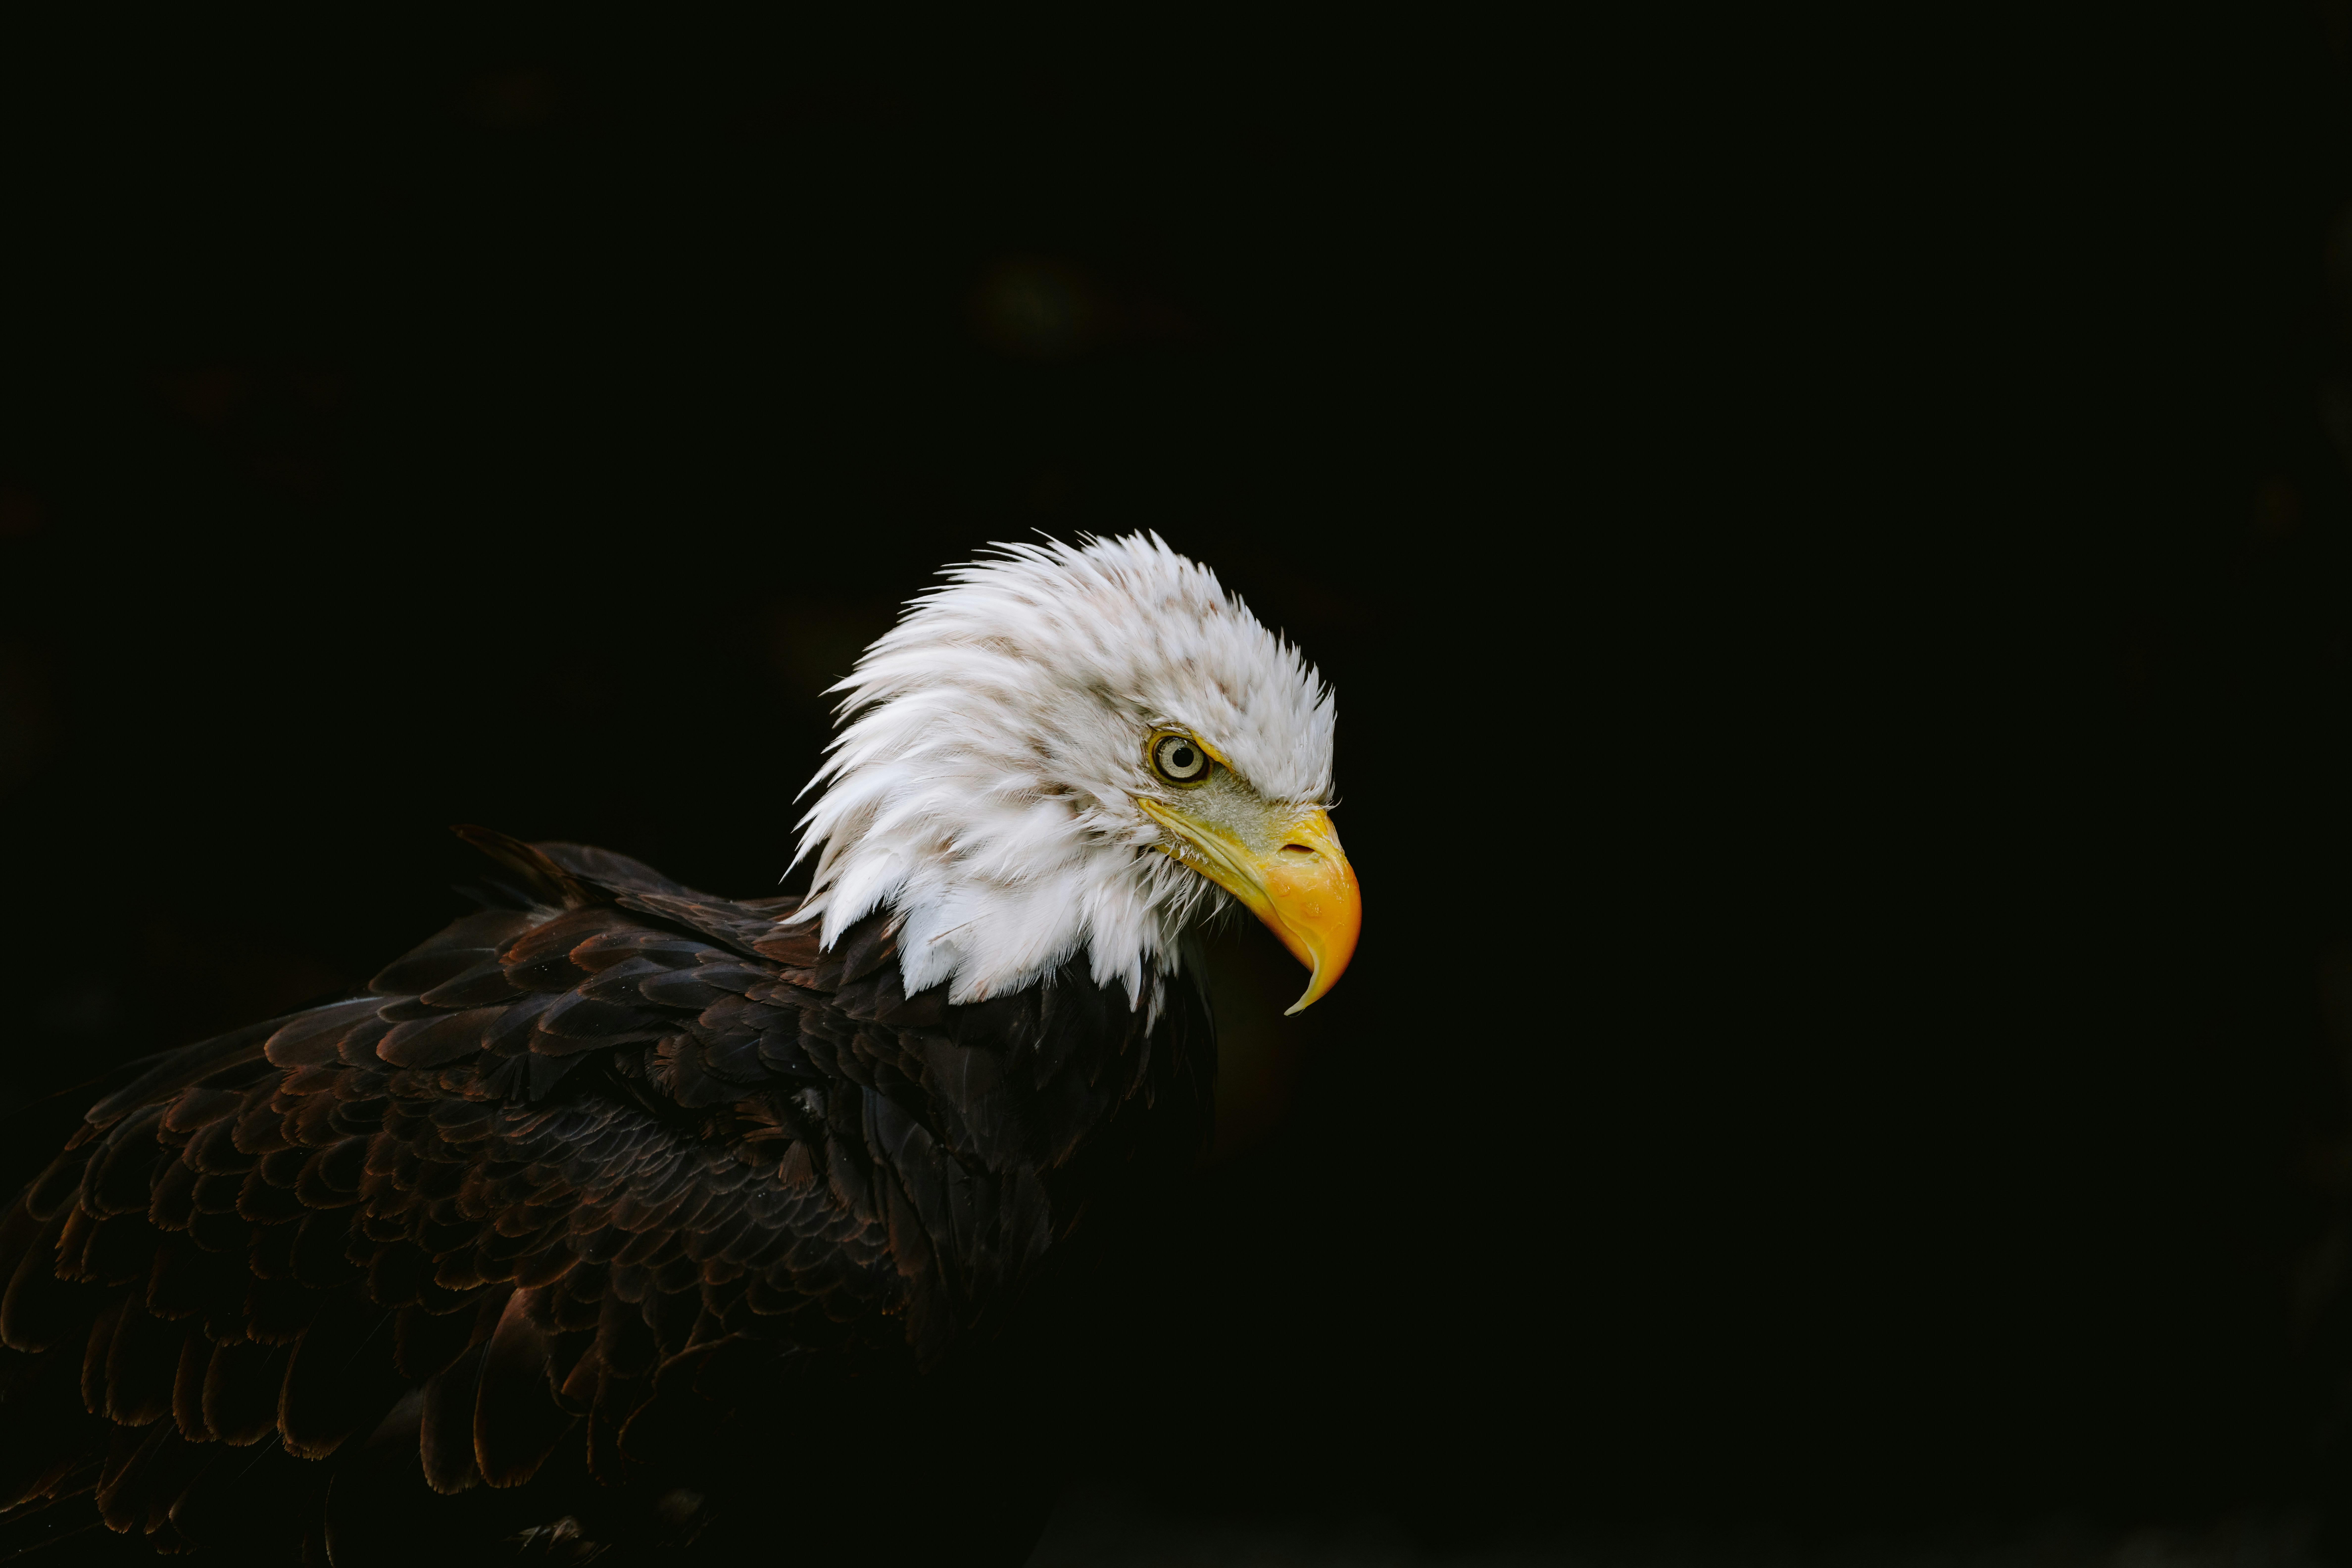 The mighty eagle, the symbol of America, is now the star of a beautiful Unsplash collection containing over eagle 500 images that are totally free to use. Welcome to the future.